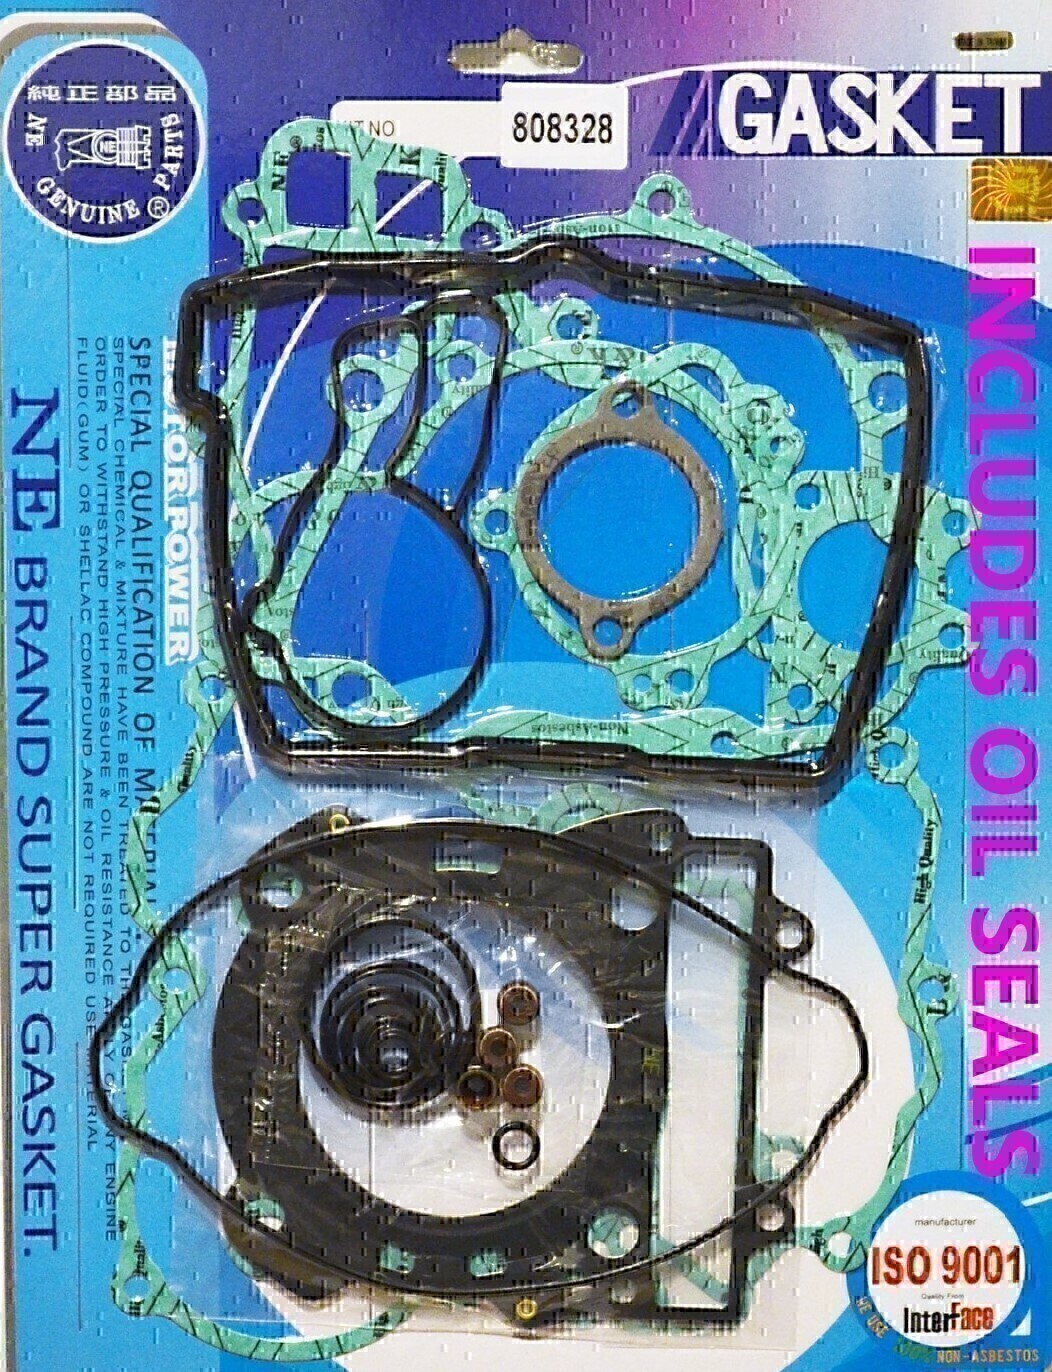 COMPLETE GASKET & OIL SEAL KIT FOR KTM 250SX-F 2005 - 2012 / 250EXC-F 2007 - 2013